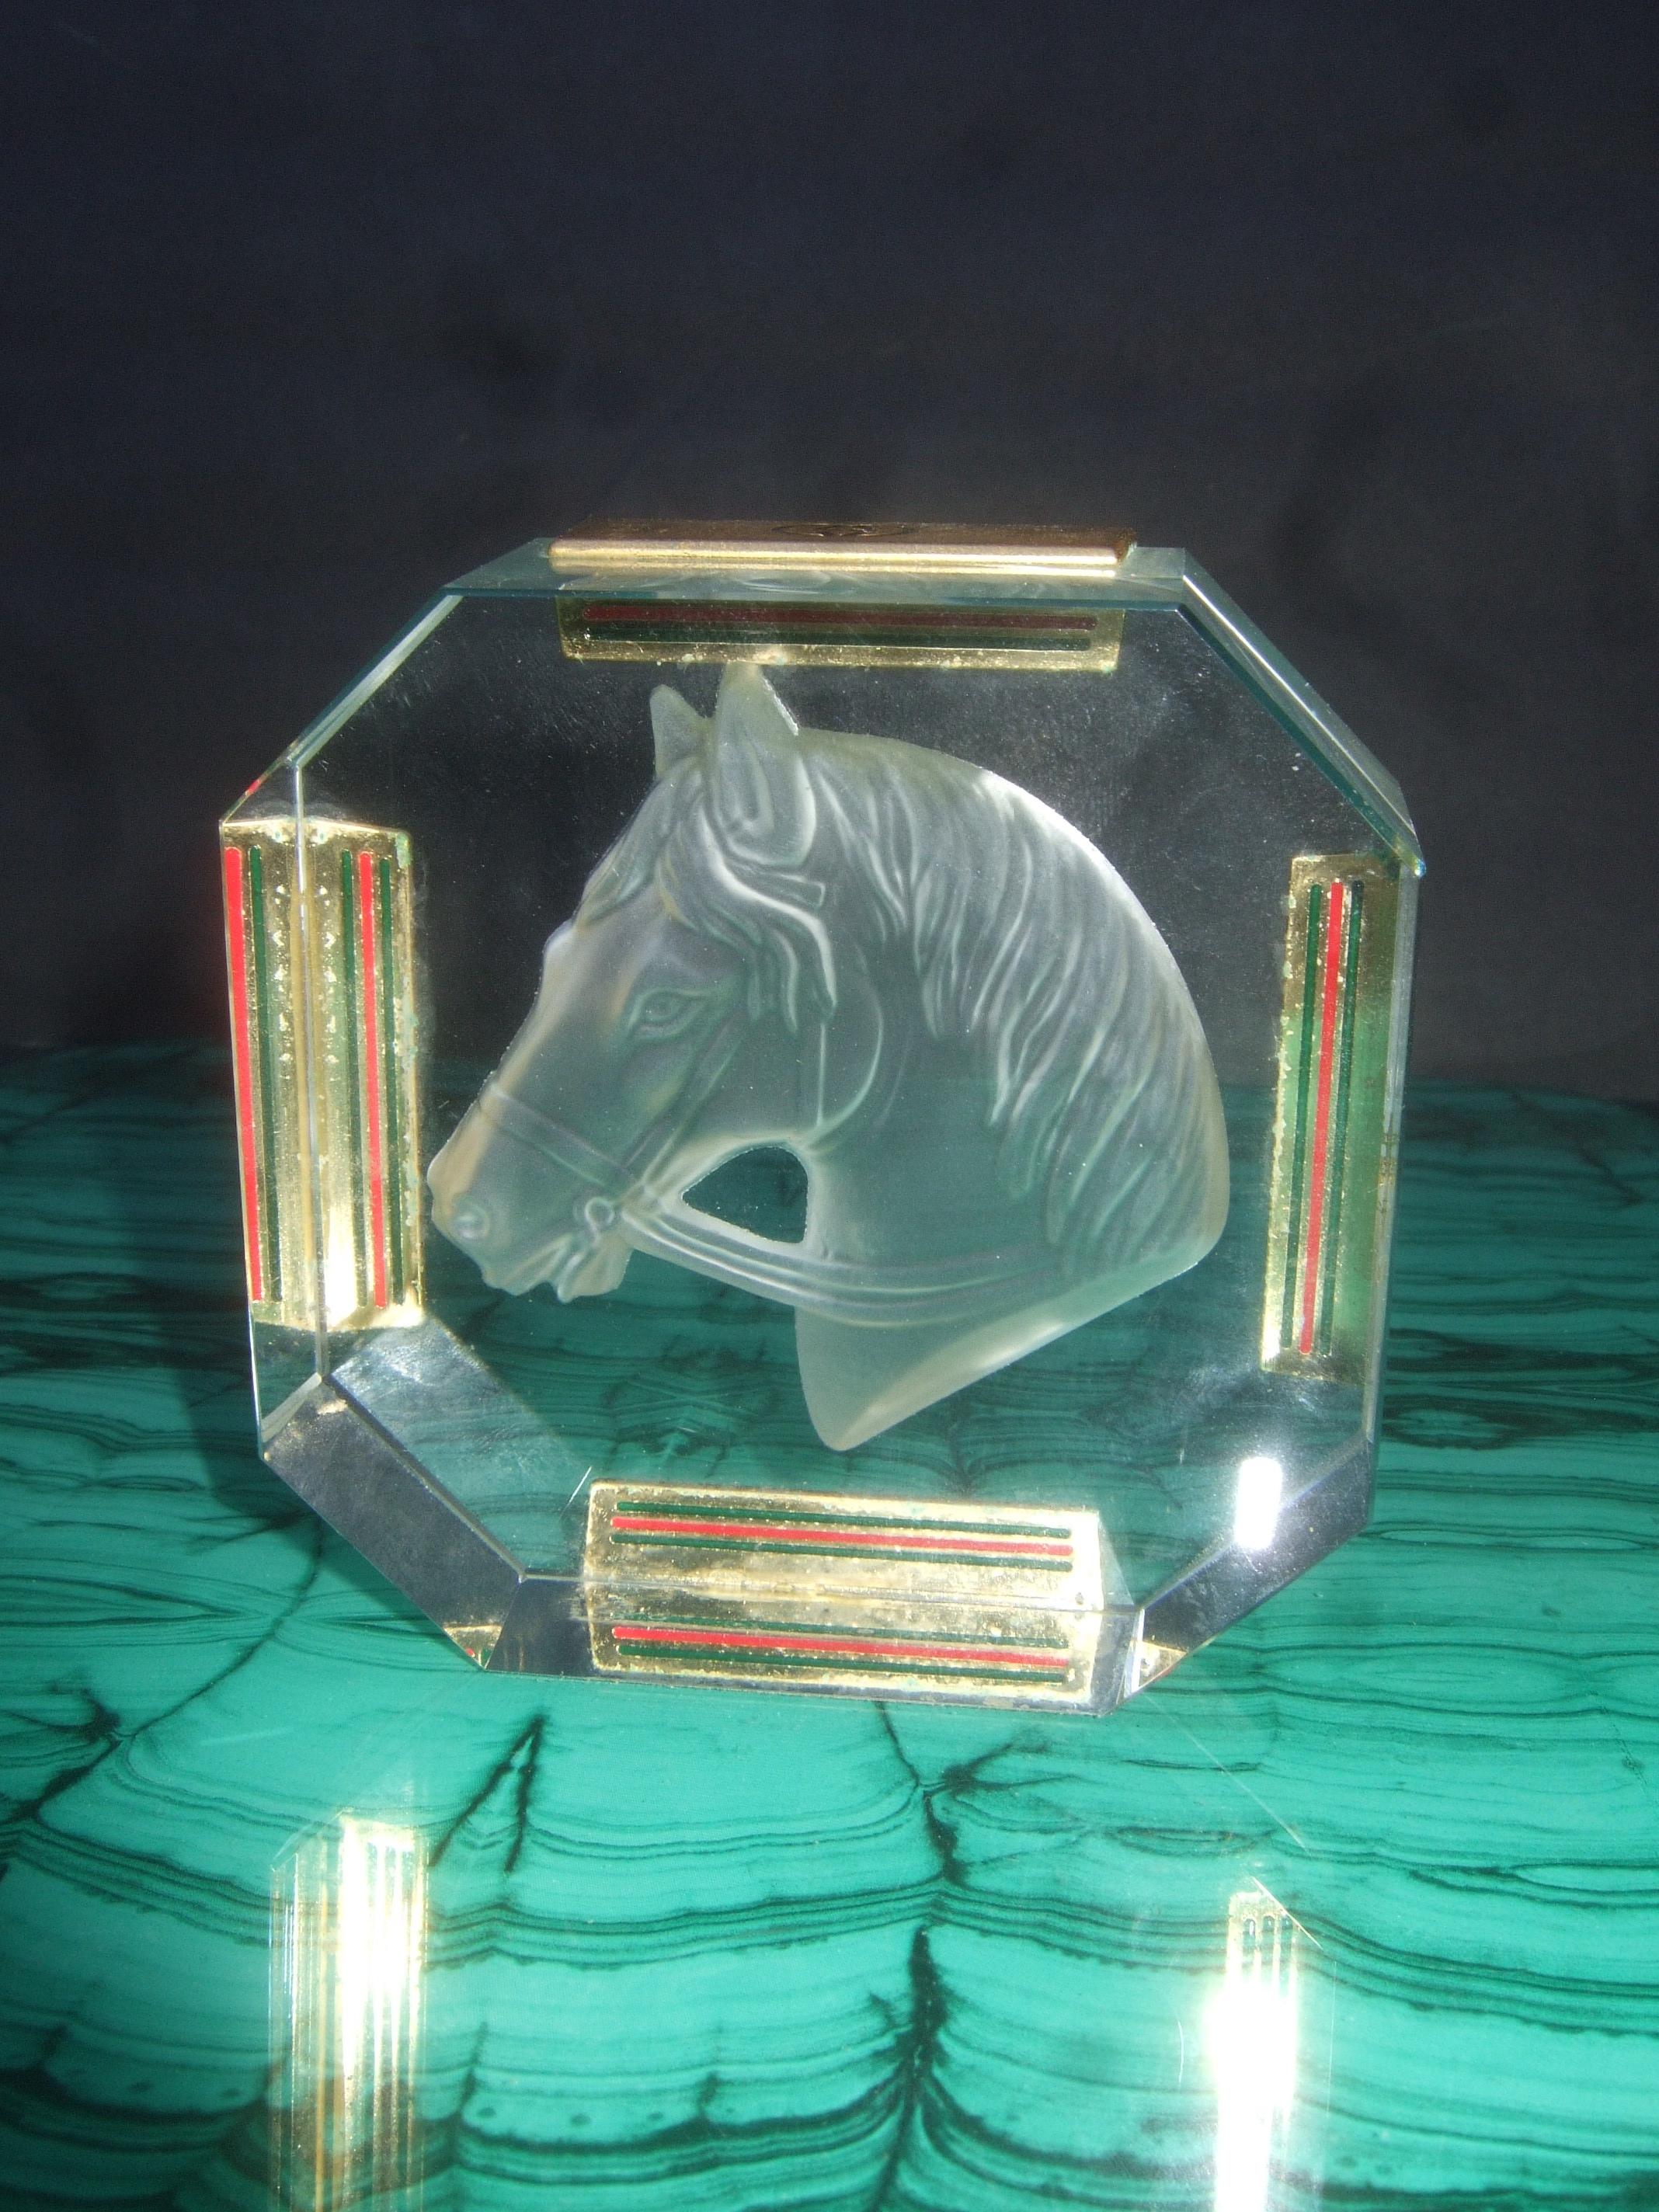 Gucci Crystal intaglio equine octagon paper-weight c 1970s 
The elegant crystal paper-weight is designed with a majestic intaglio horse head figure

Four of the sides are adorned with gilt metal rectangular plates inscribed with Gucci's interlocked